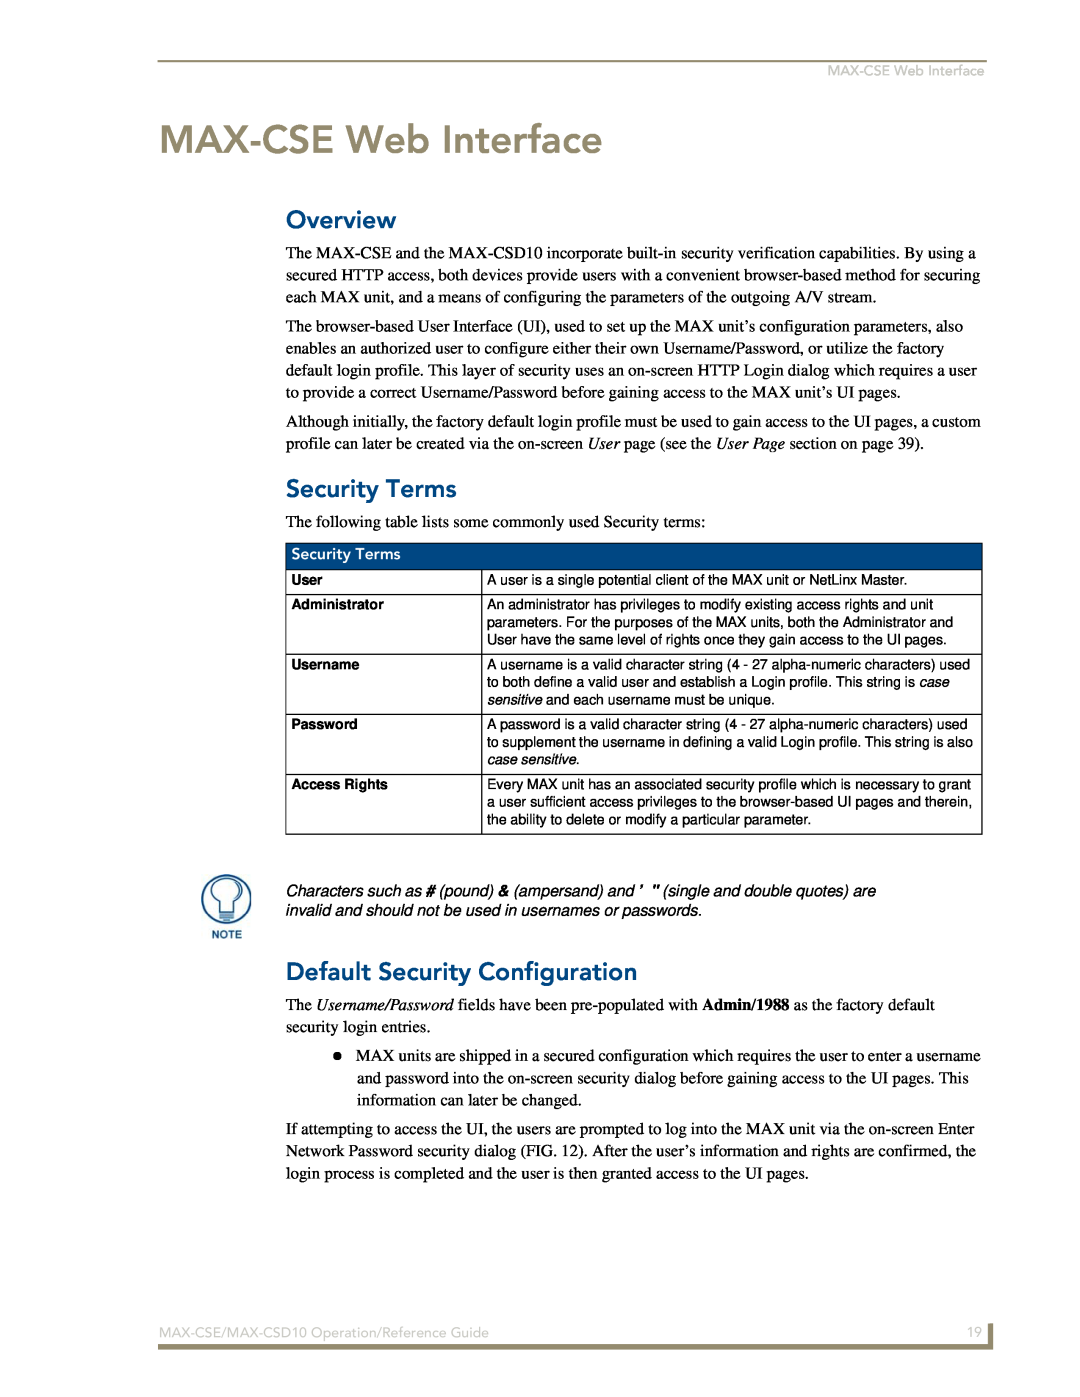 AMX MAX-CSD10 manual MAX-CSEWeb Interface, Security Terms, Default Security Configuration, Overview 